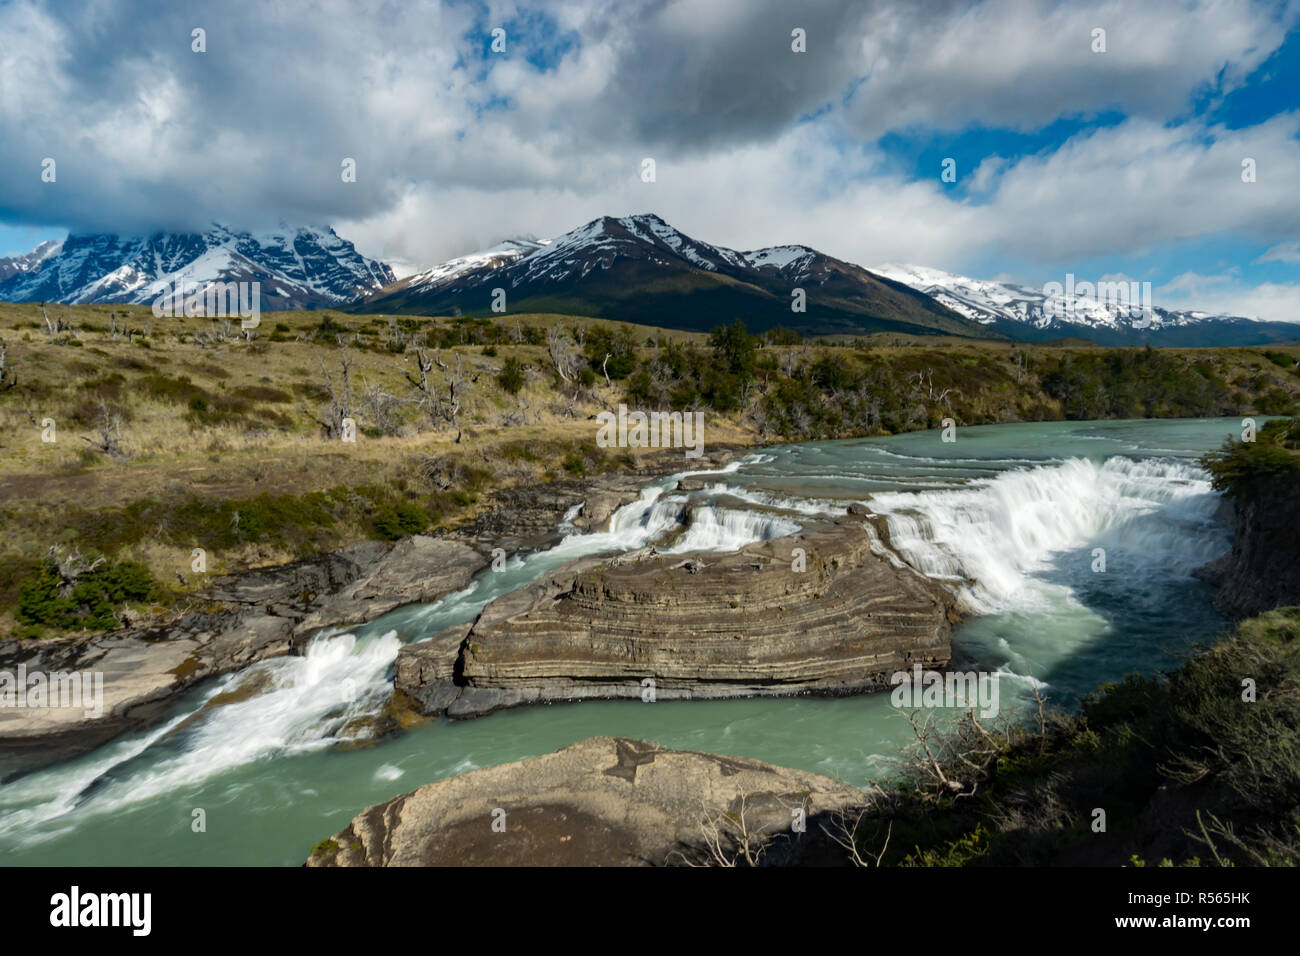 The Paine waterfall in Torres del Paine National Park, Patagonia, Chile Stock Photo